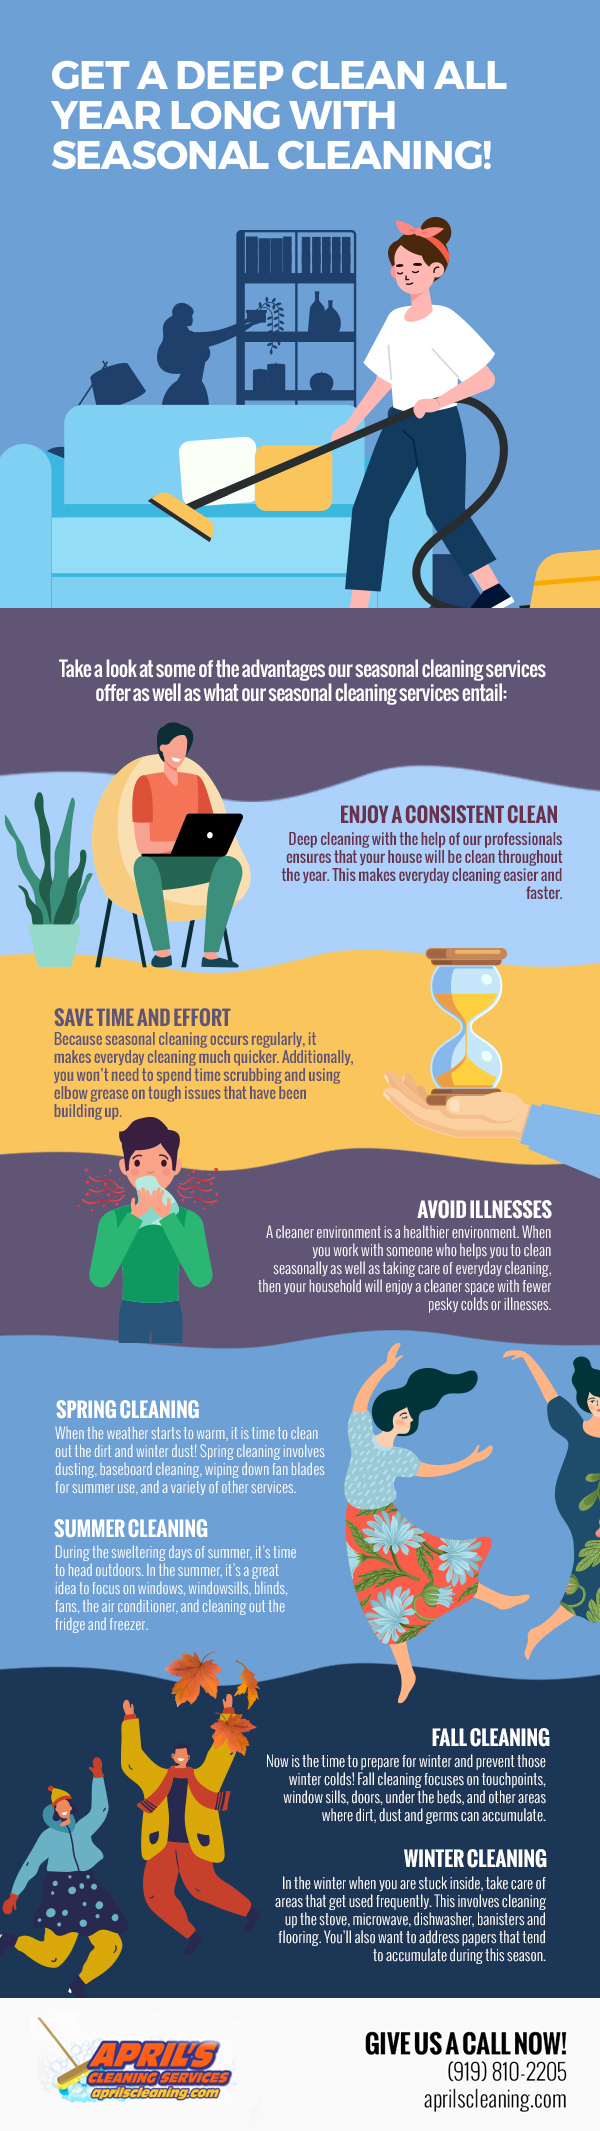 Get a Deep Clean all Year Long with Seasonal Cleaning! [infographic]